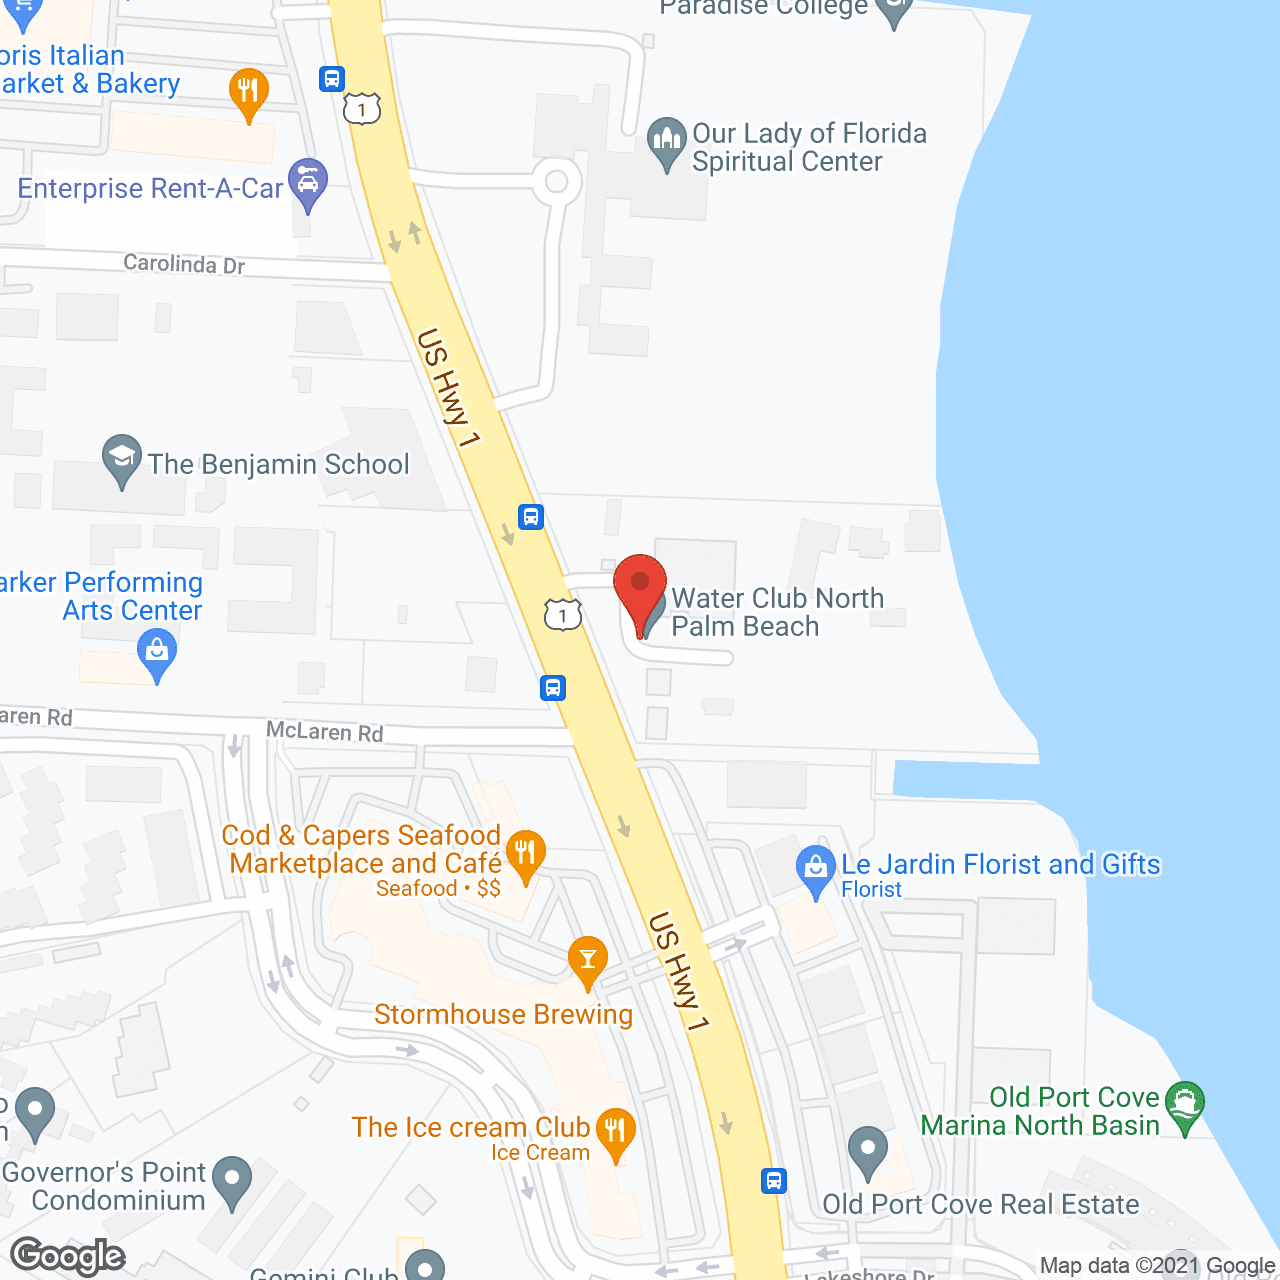 Exceptional Home Care of Florida in google map